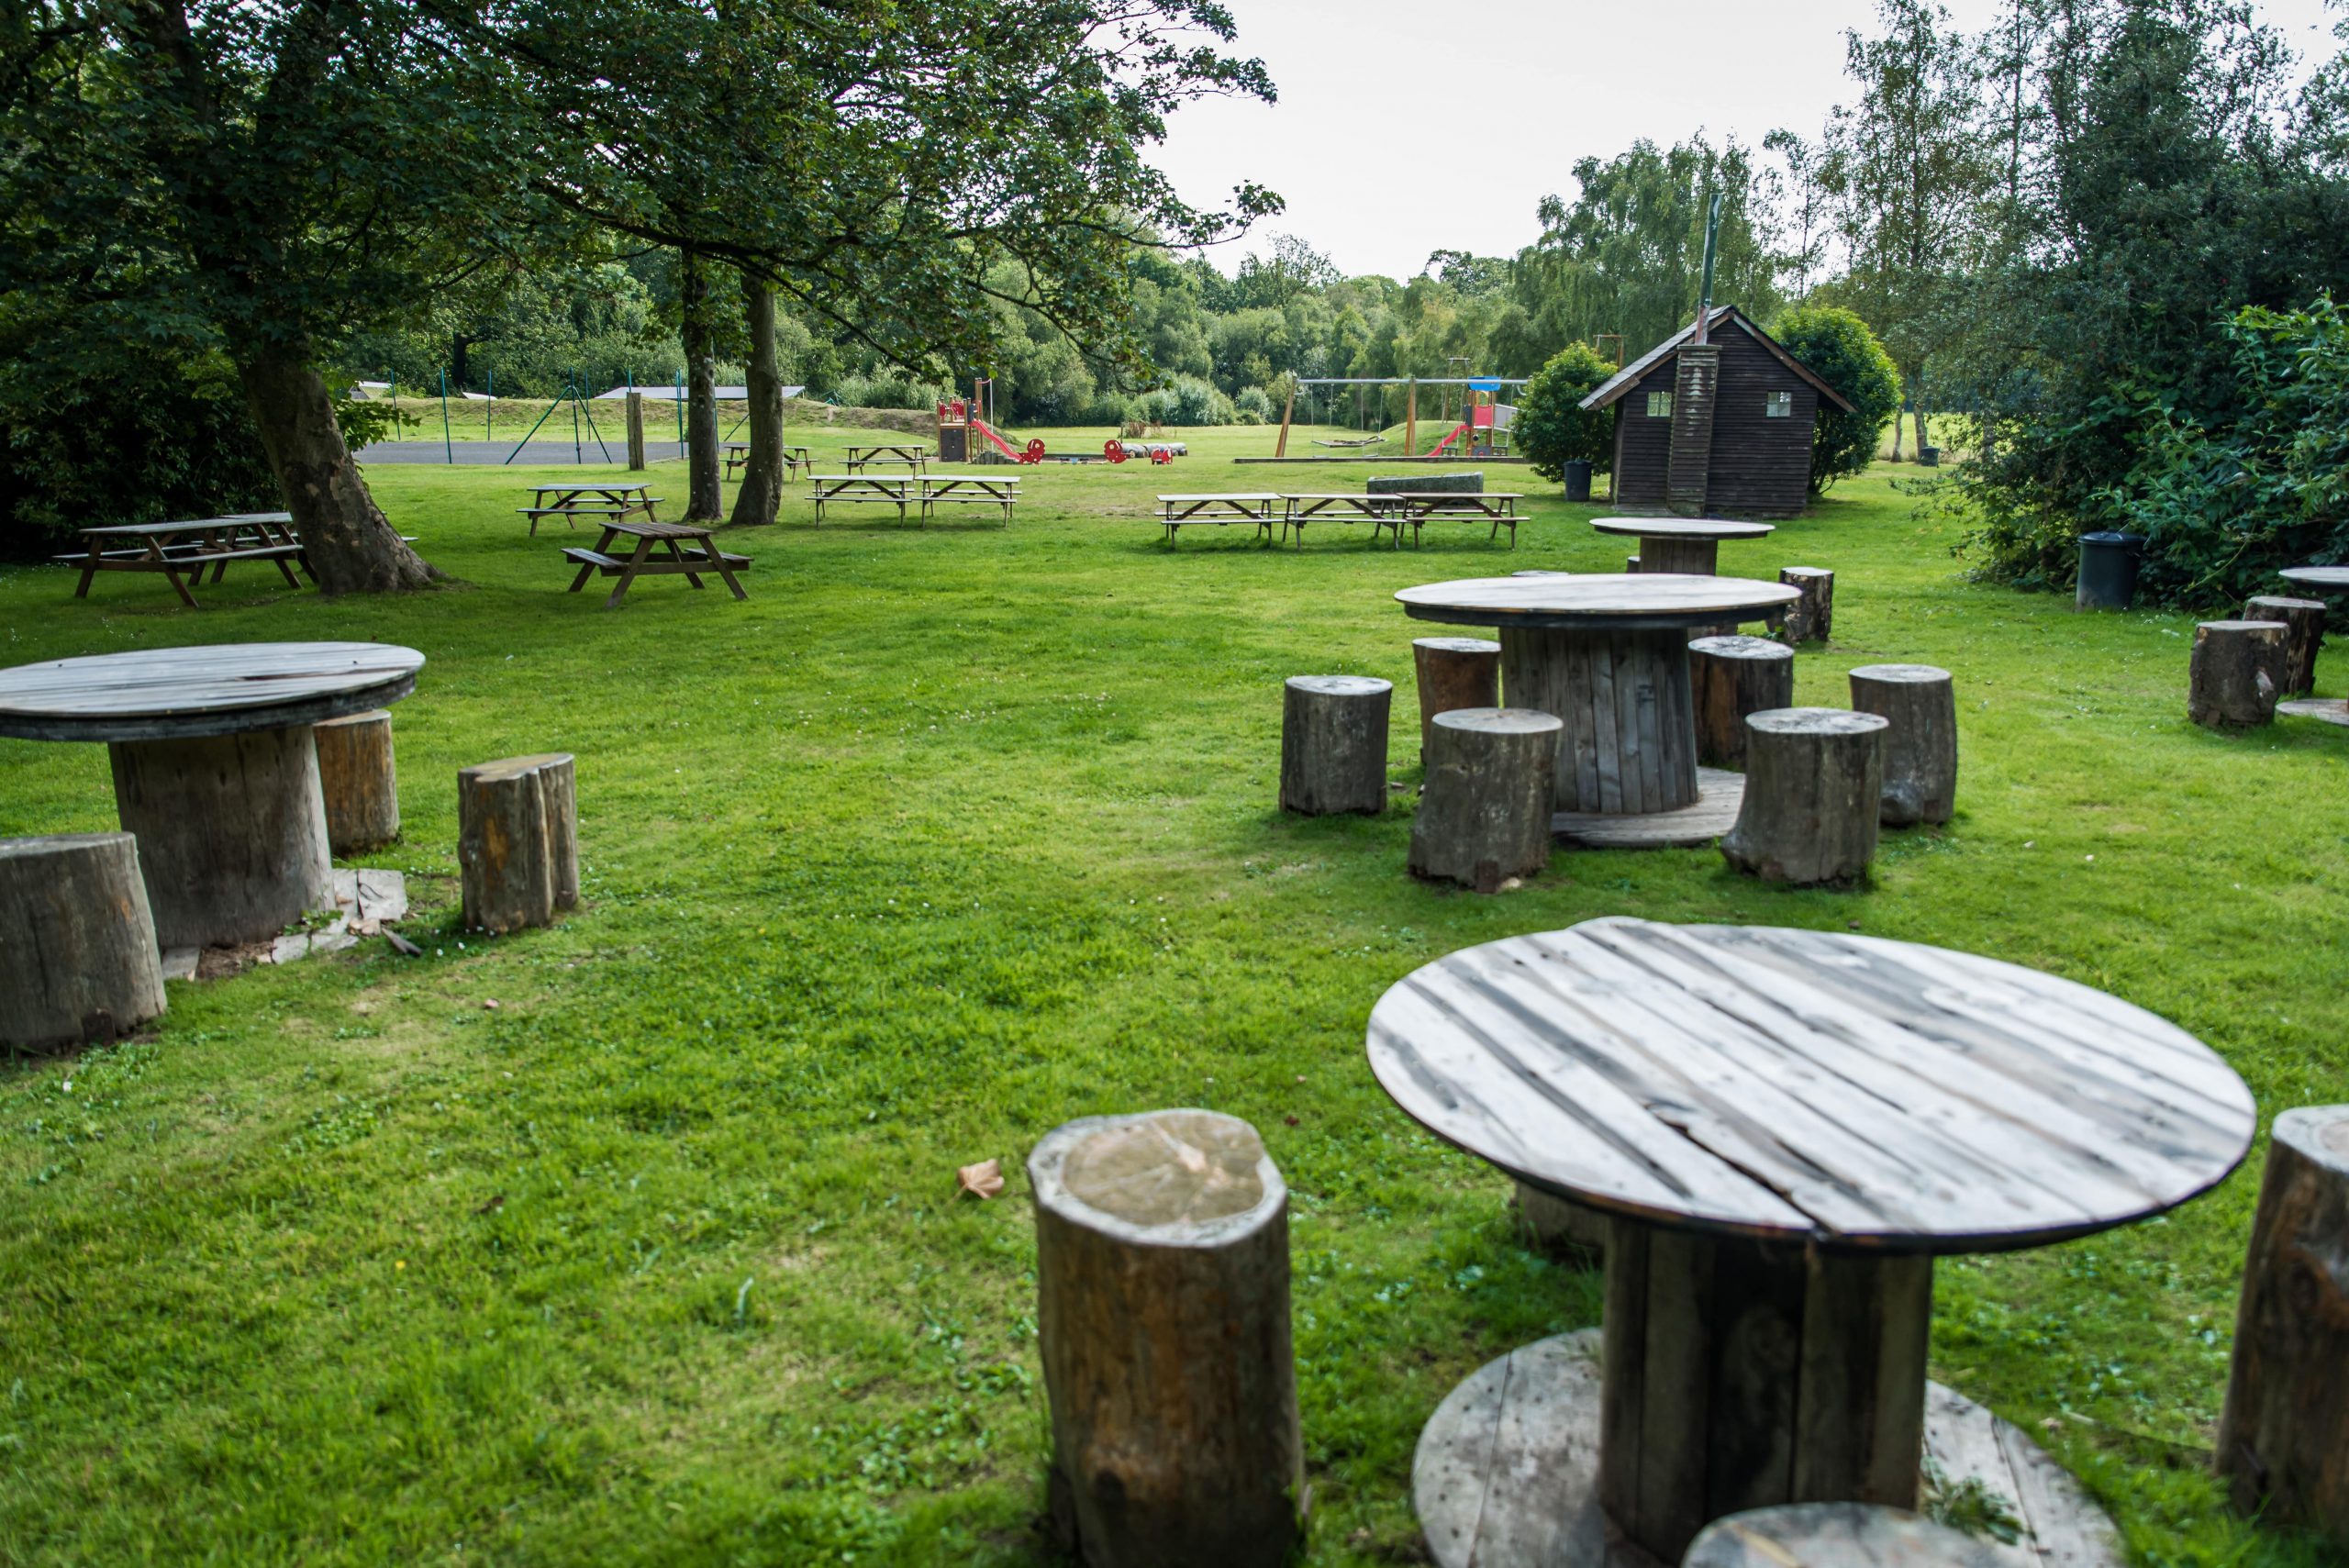 Park with wooden stumps as chairs and round wooden tables